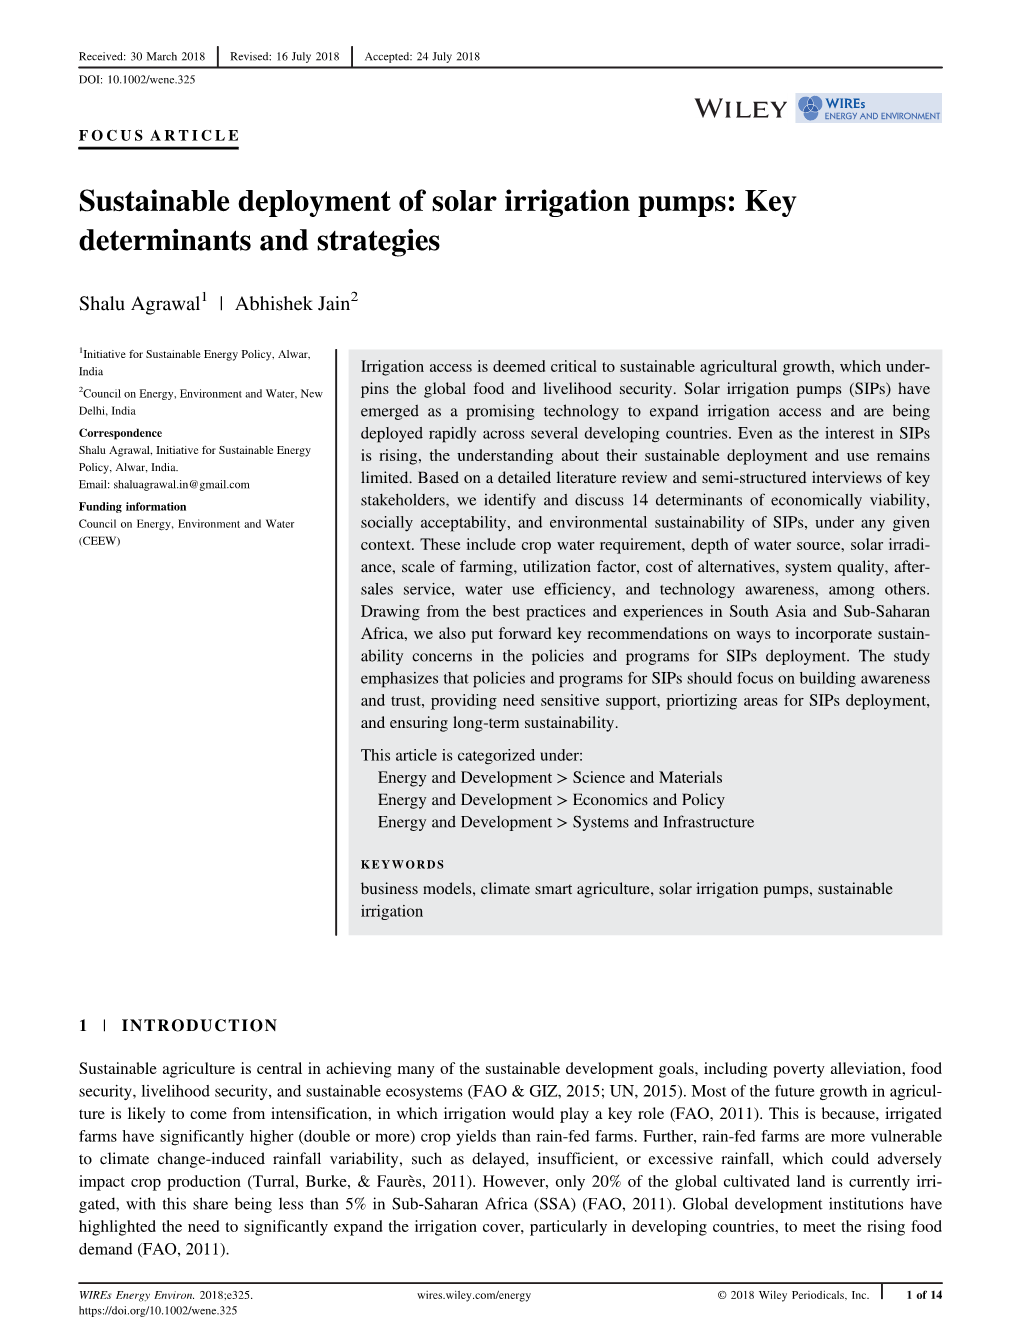 Sustainable Deployment of Solar Irrigation Pumps: Key Determinants and Strategies